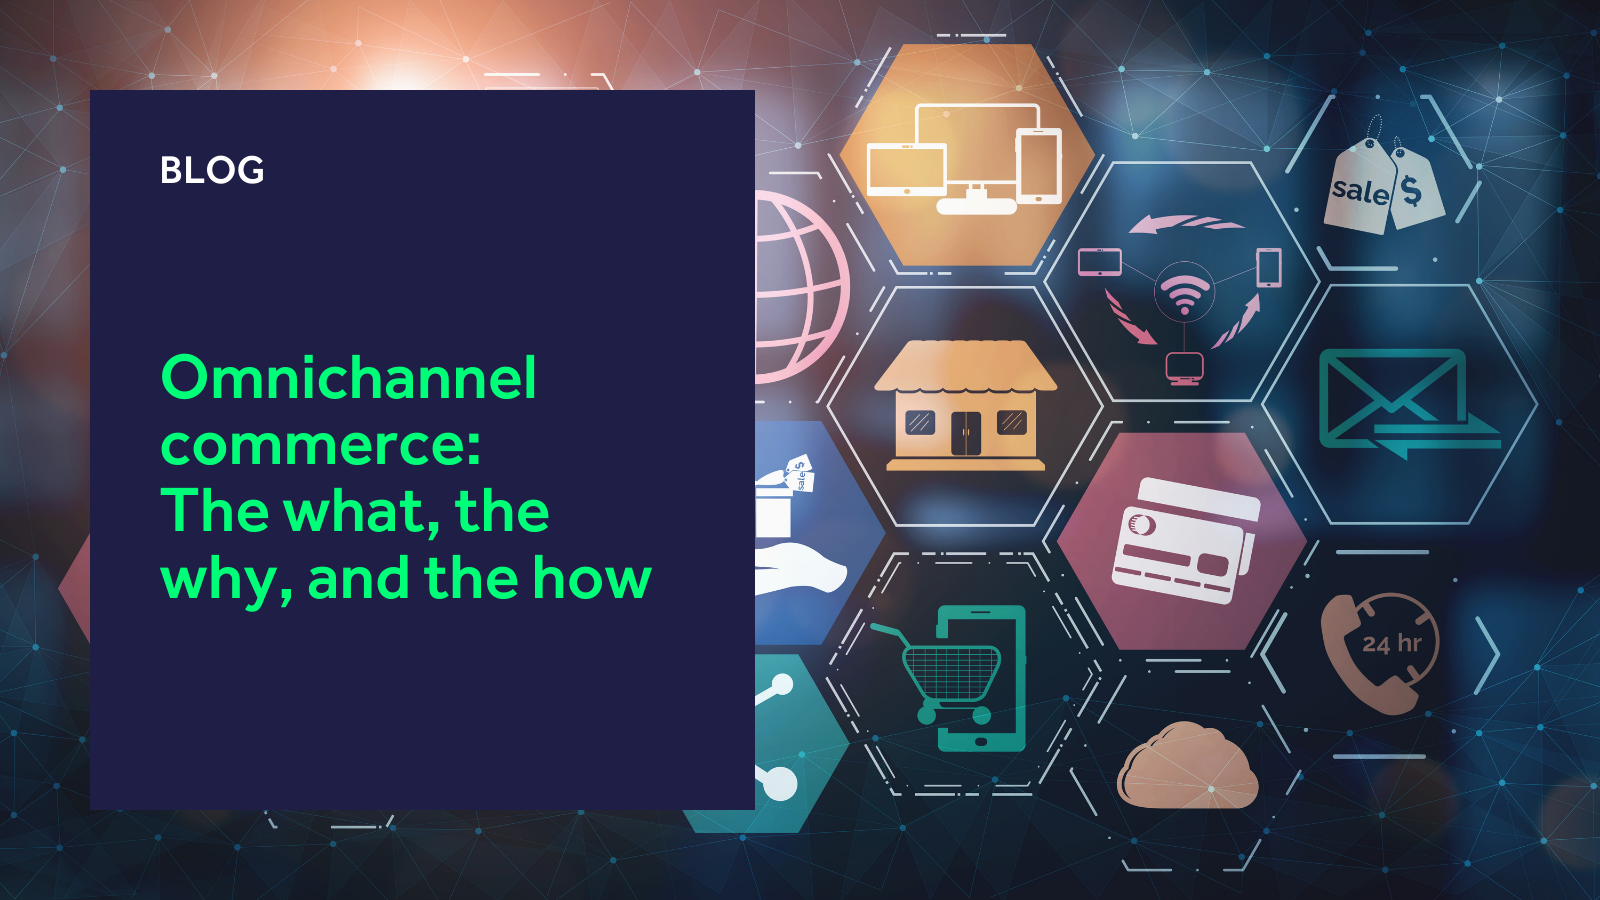 What is omnichannel commerce?